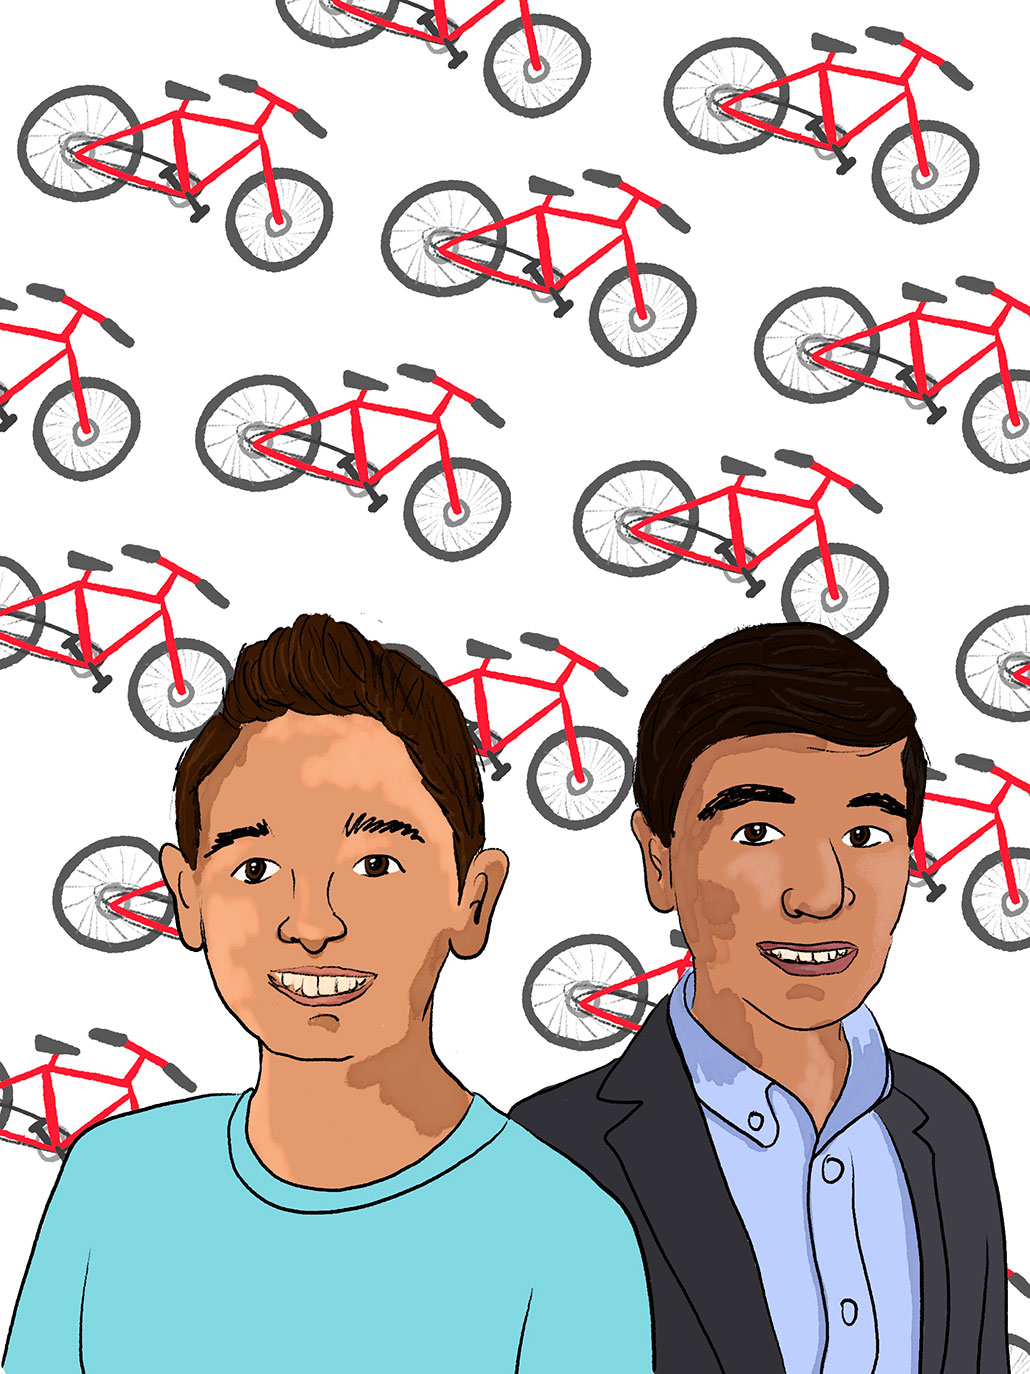 an illustration of two twelve year old boys against a white background with red and black bicycles